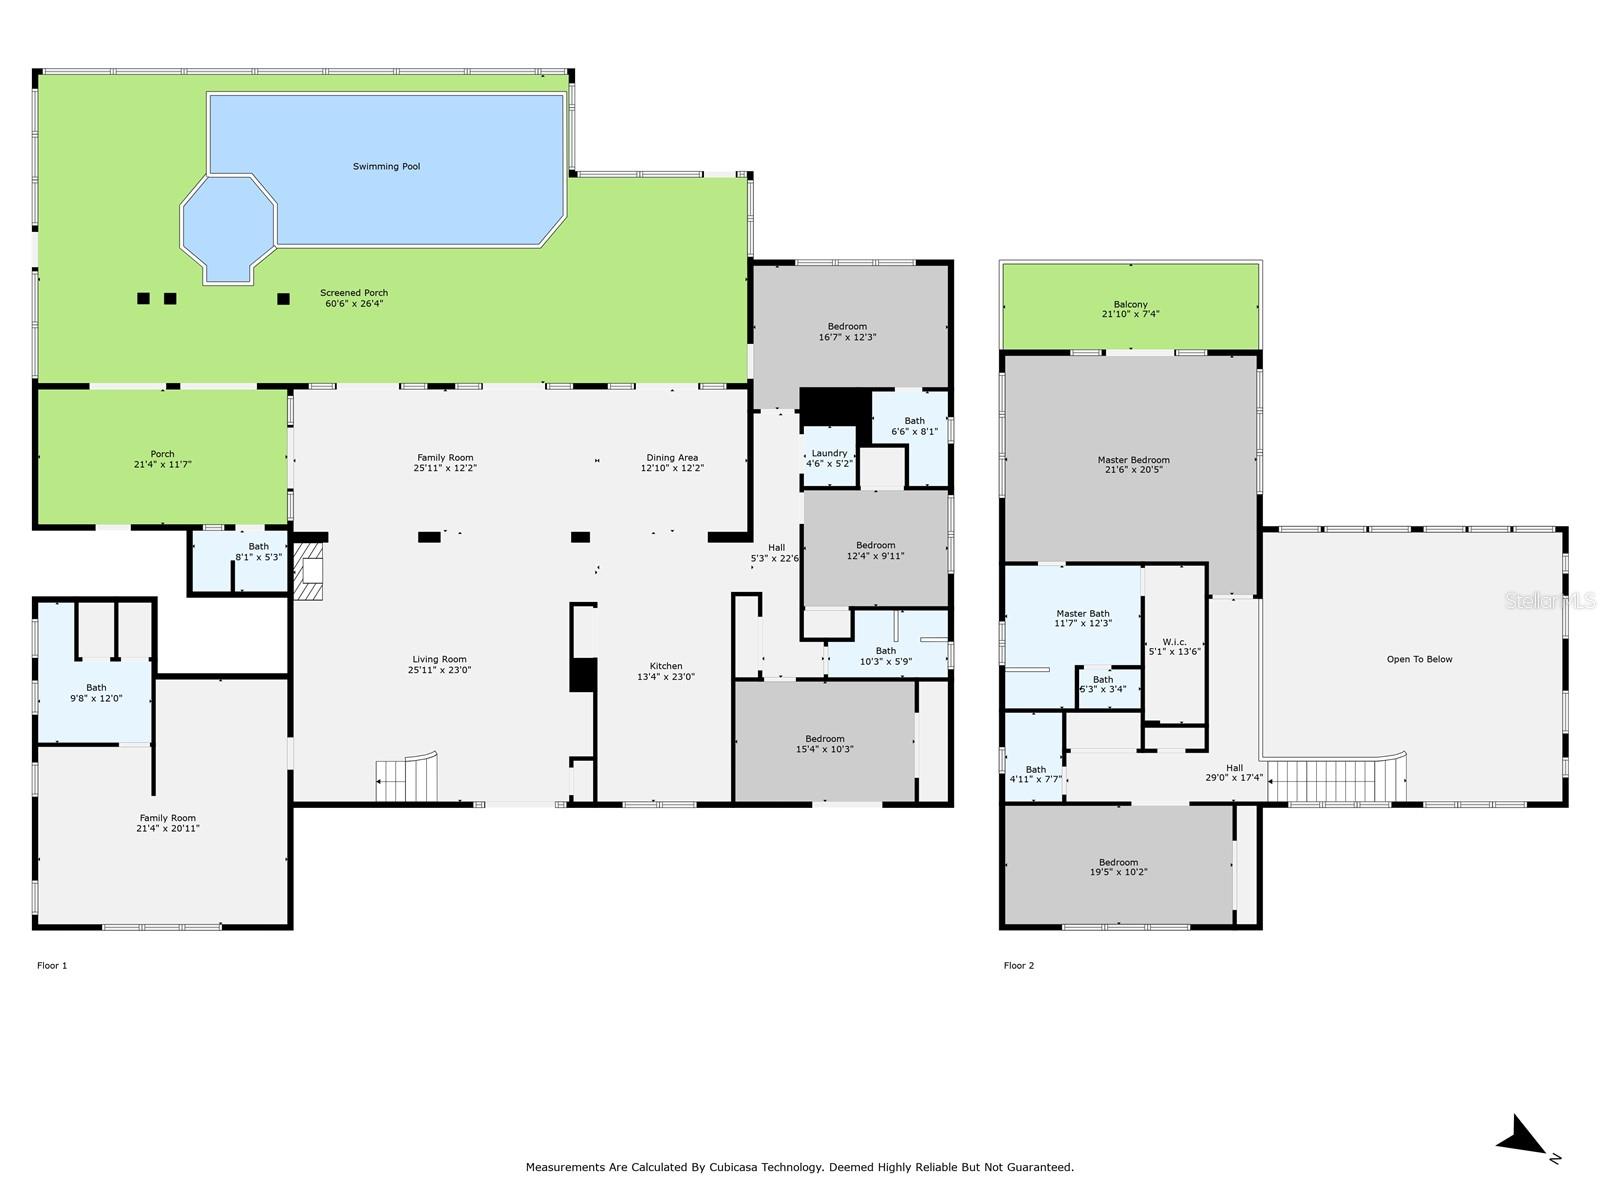 Floor Plan - * Measurements are generated by Cubicasa Tech and are not guaranteed